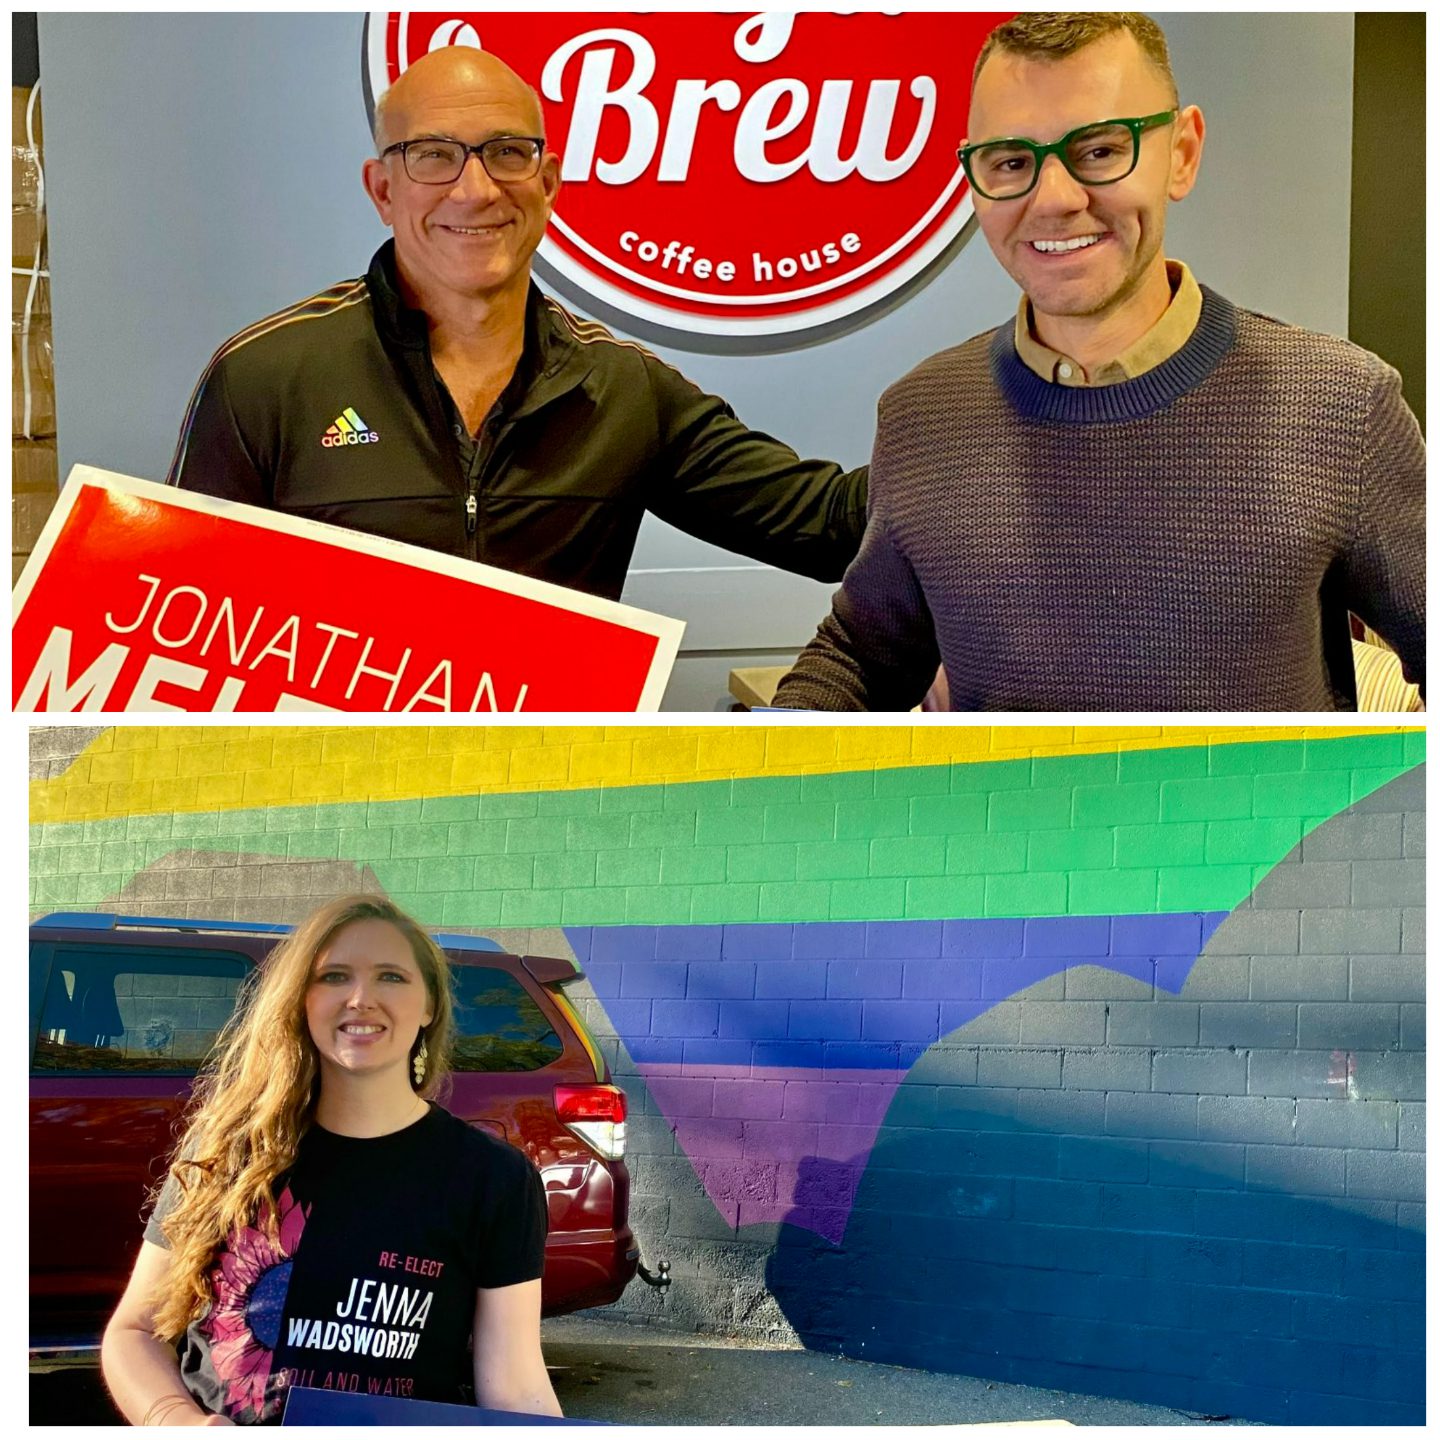 Top: Marty and Jonathan Melton. Bottom: Jenna Wadsworth on the campaign trail. 